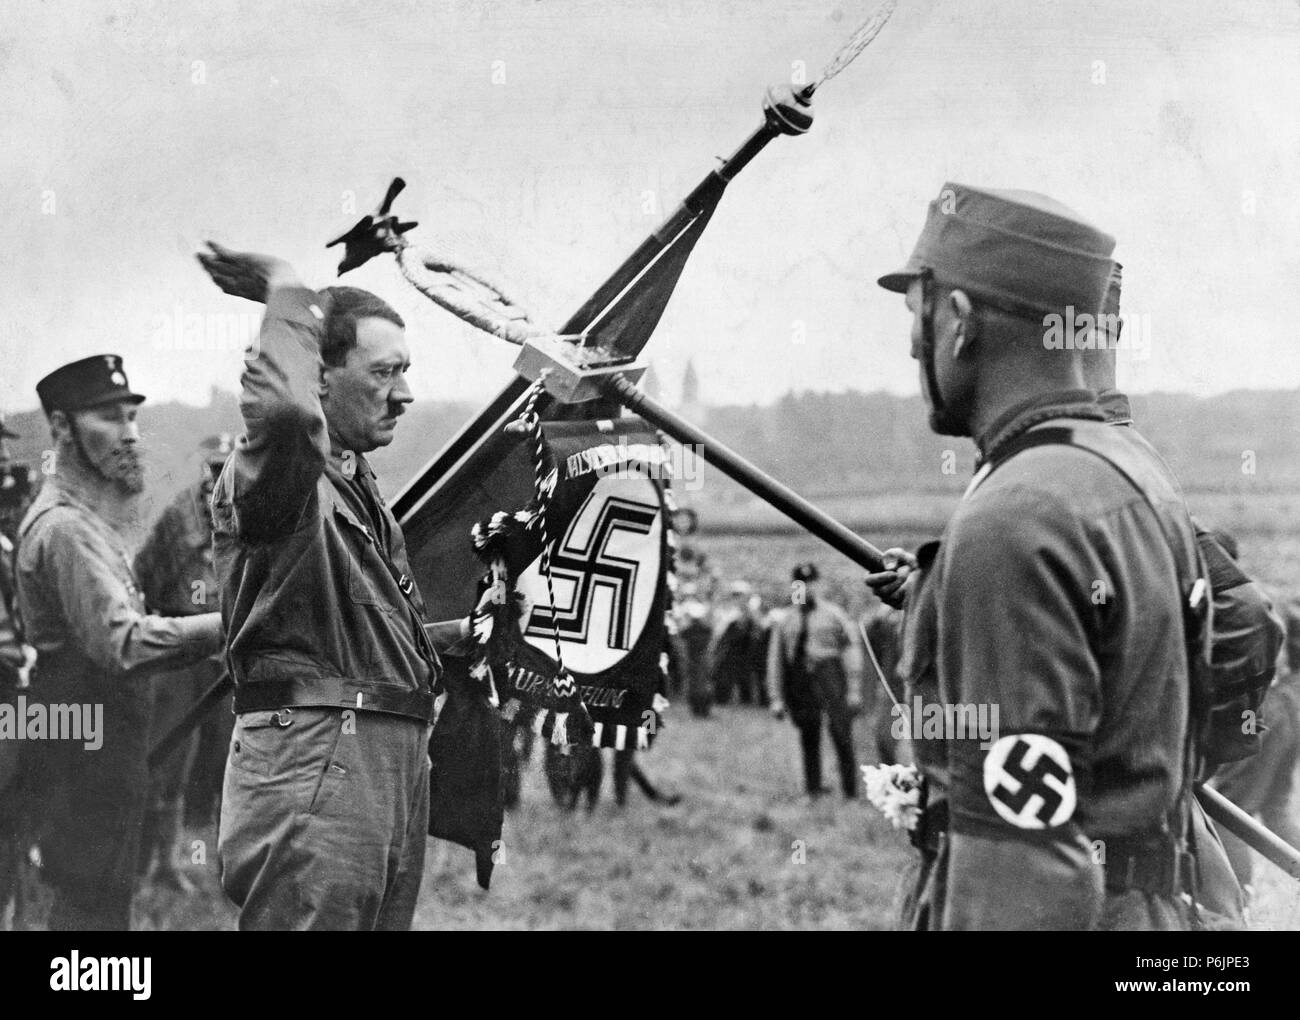 Adolf Hitler inaugurating a Nazi Party flag during a party rally in Germany. Stock Photo